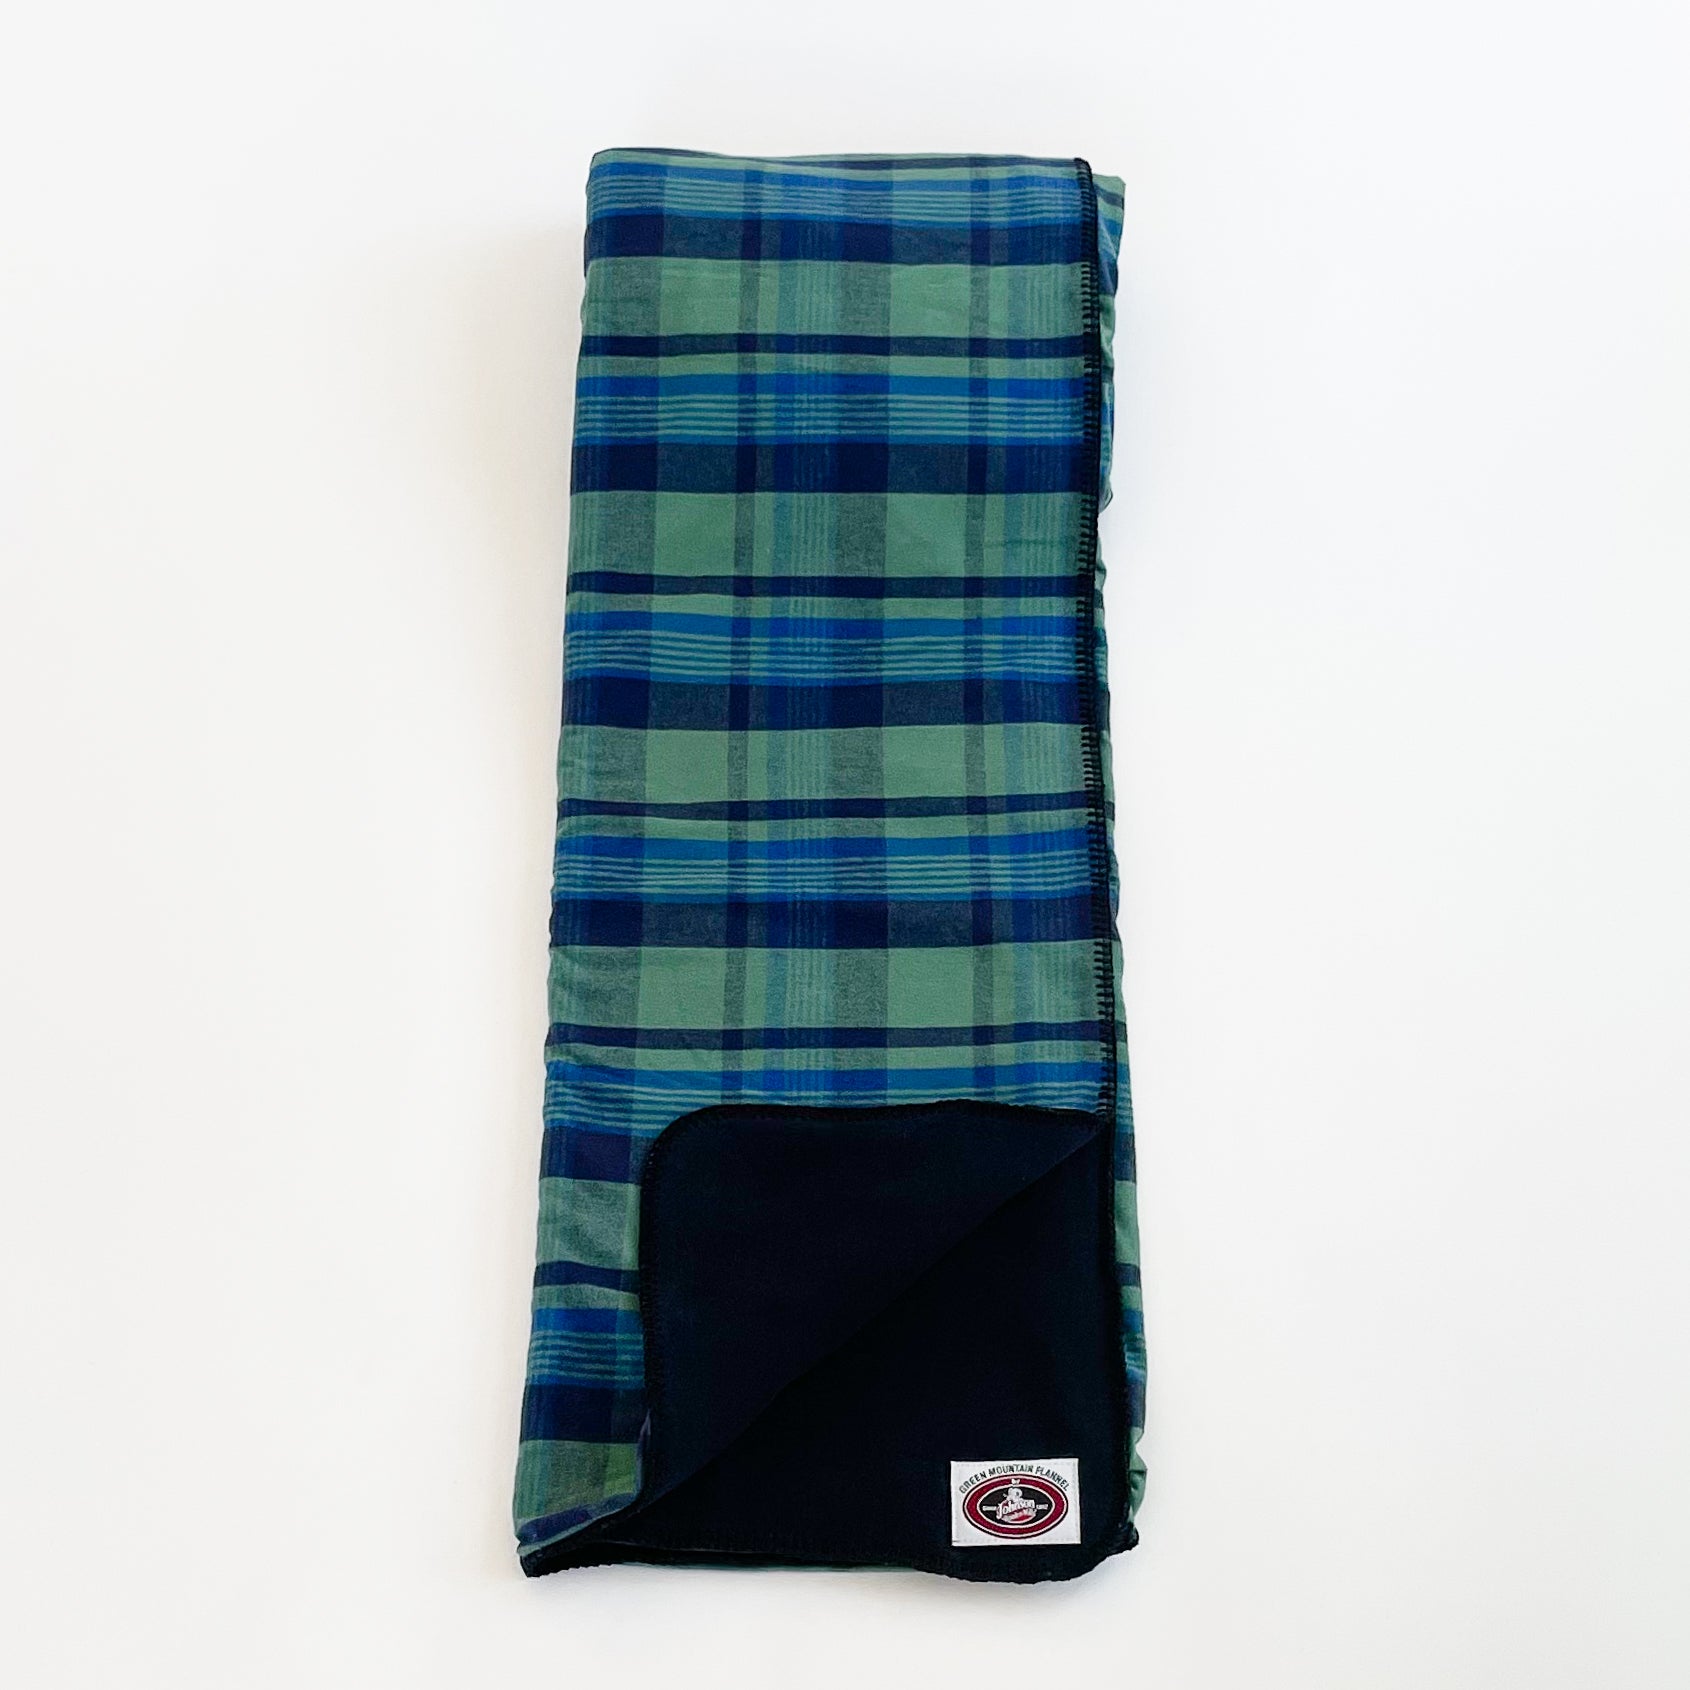 Green Mountain Flannel Throw Royal Navy & Green stripes with black fleece lining open corner view